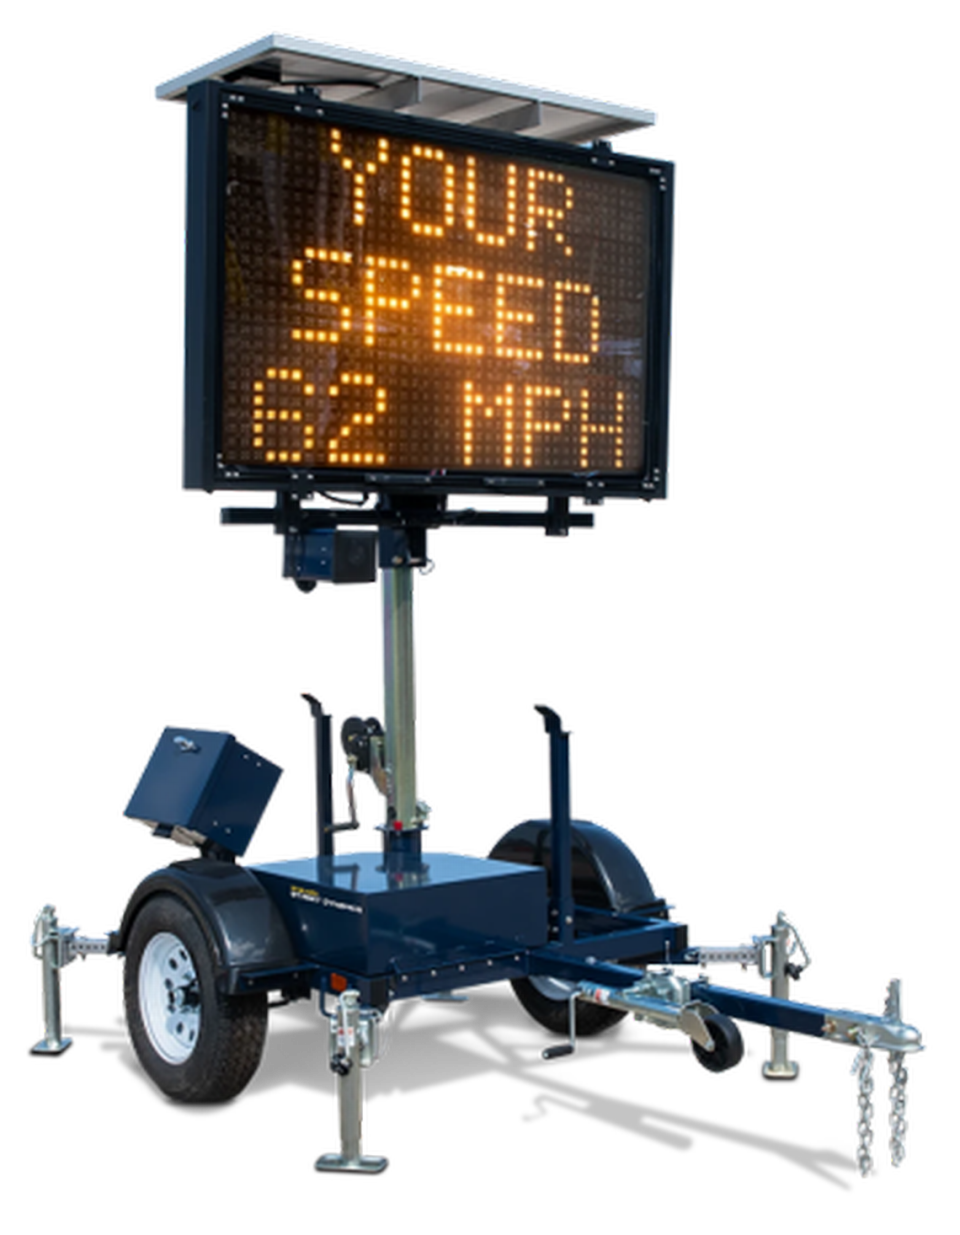 A trailer that flashes blue lights similar to those found on law enforcement vehicles and shows the speed of oncoming traffic. The N.C. Department of Transportation uses trailers like these at road construction sites around the state to try to persuade drivers to slow down.